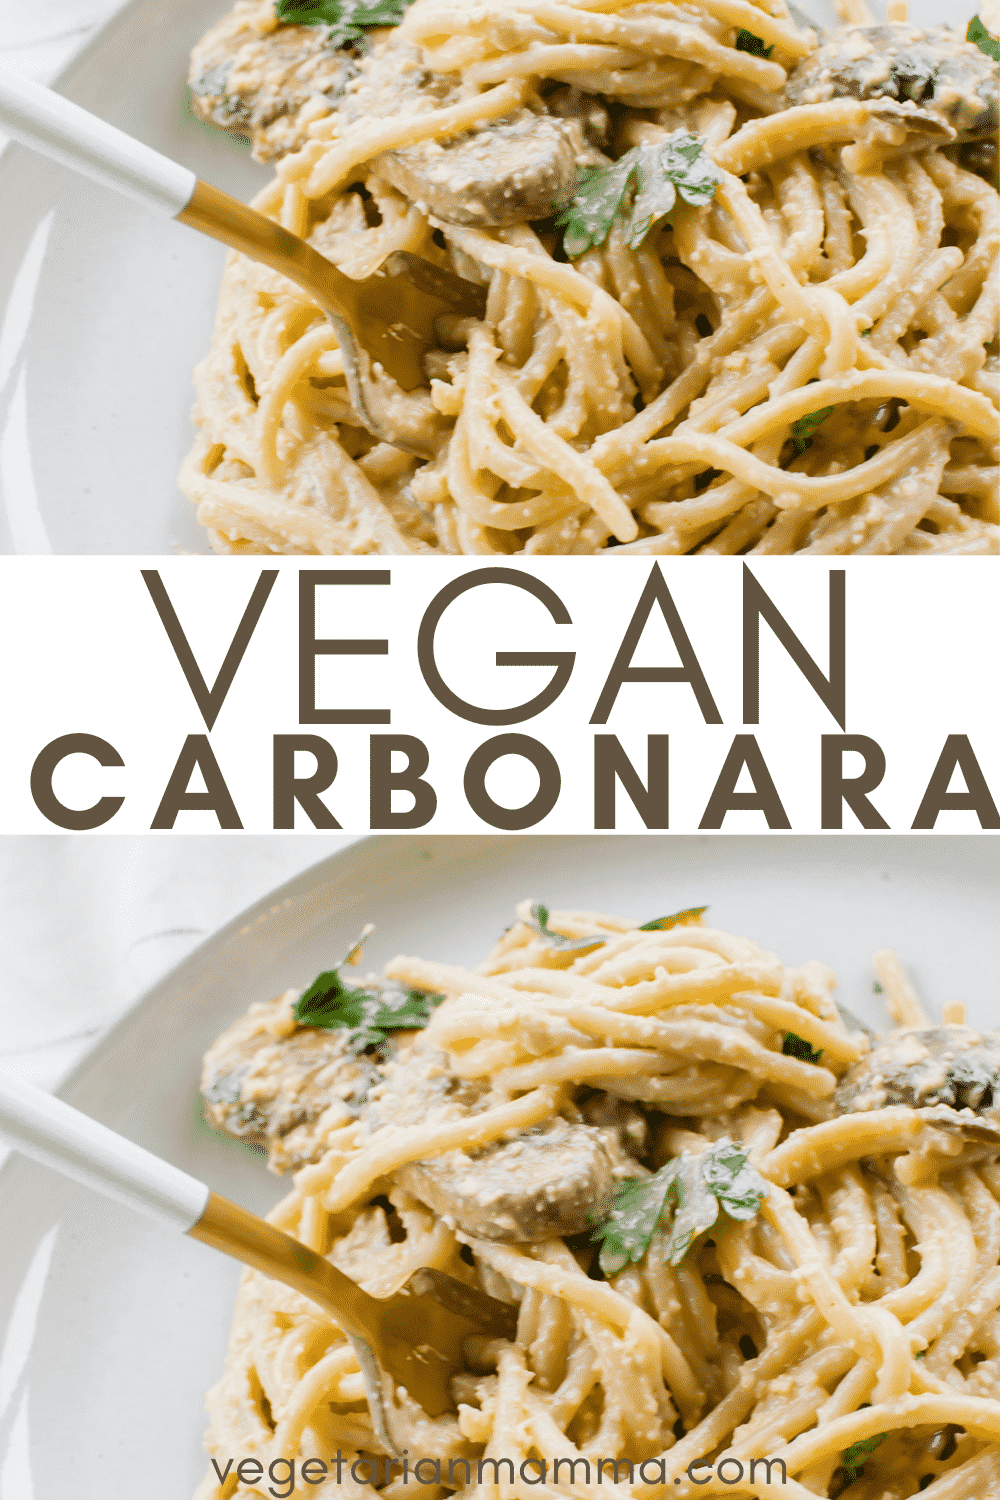 Vegan Carbonara is totally egg-free and made with no dairy! Make your own carbonara sauce with soaked cashews, coconut milk, nutritional yeast, and a little lemon juice. #vegancarbonara #carbonara